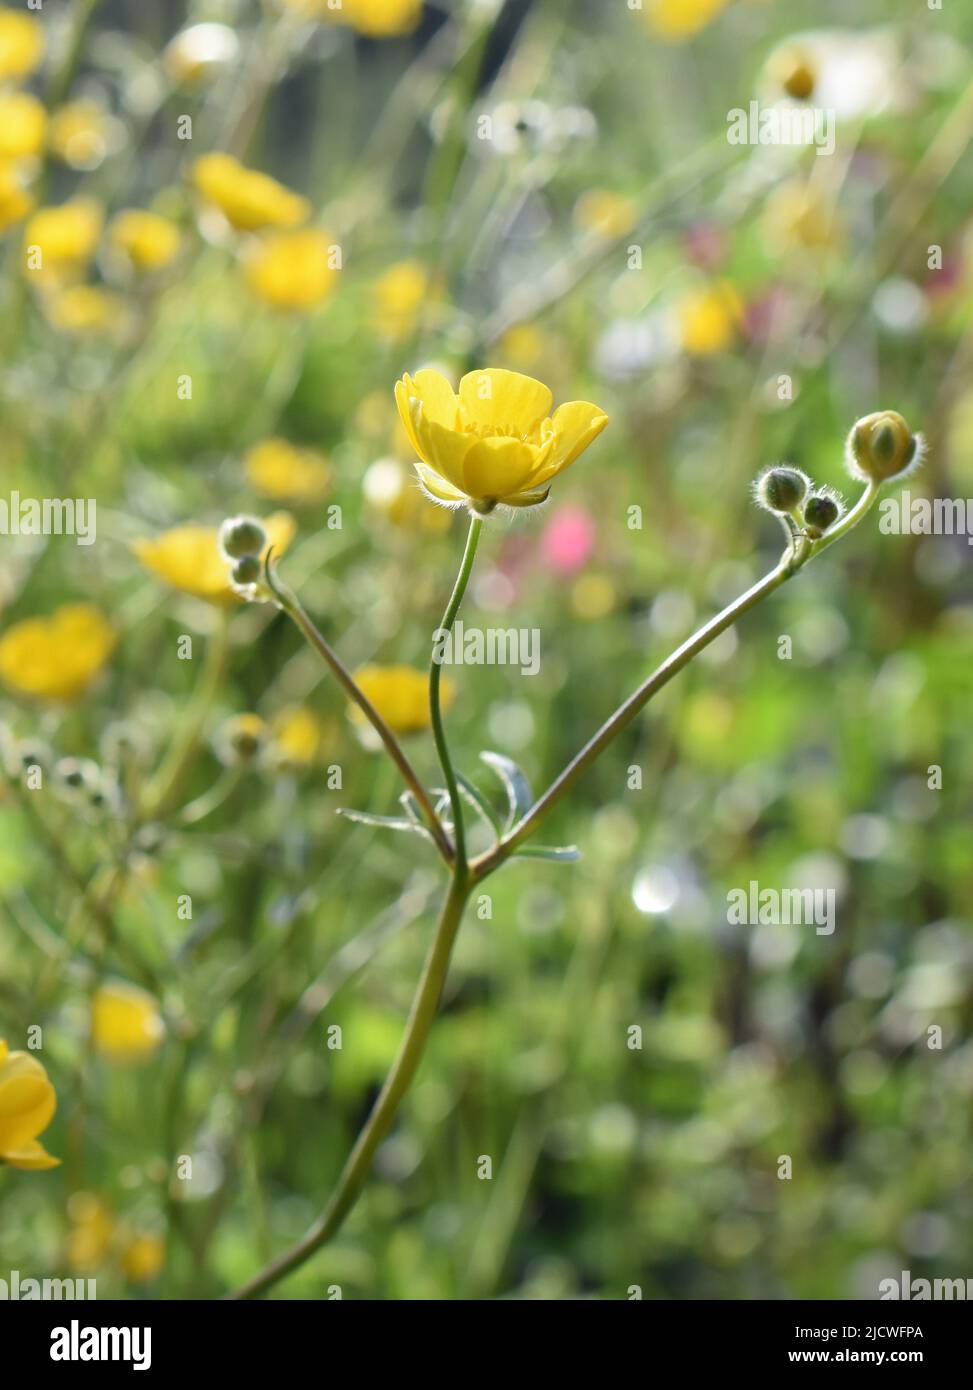 Common buttercup plant Ranunculus acris flowering in summer Stock Photo